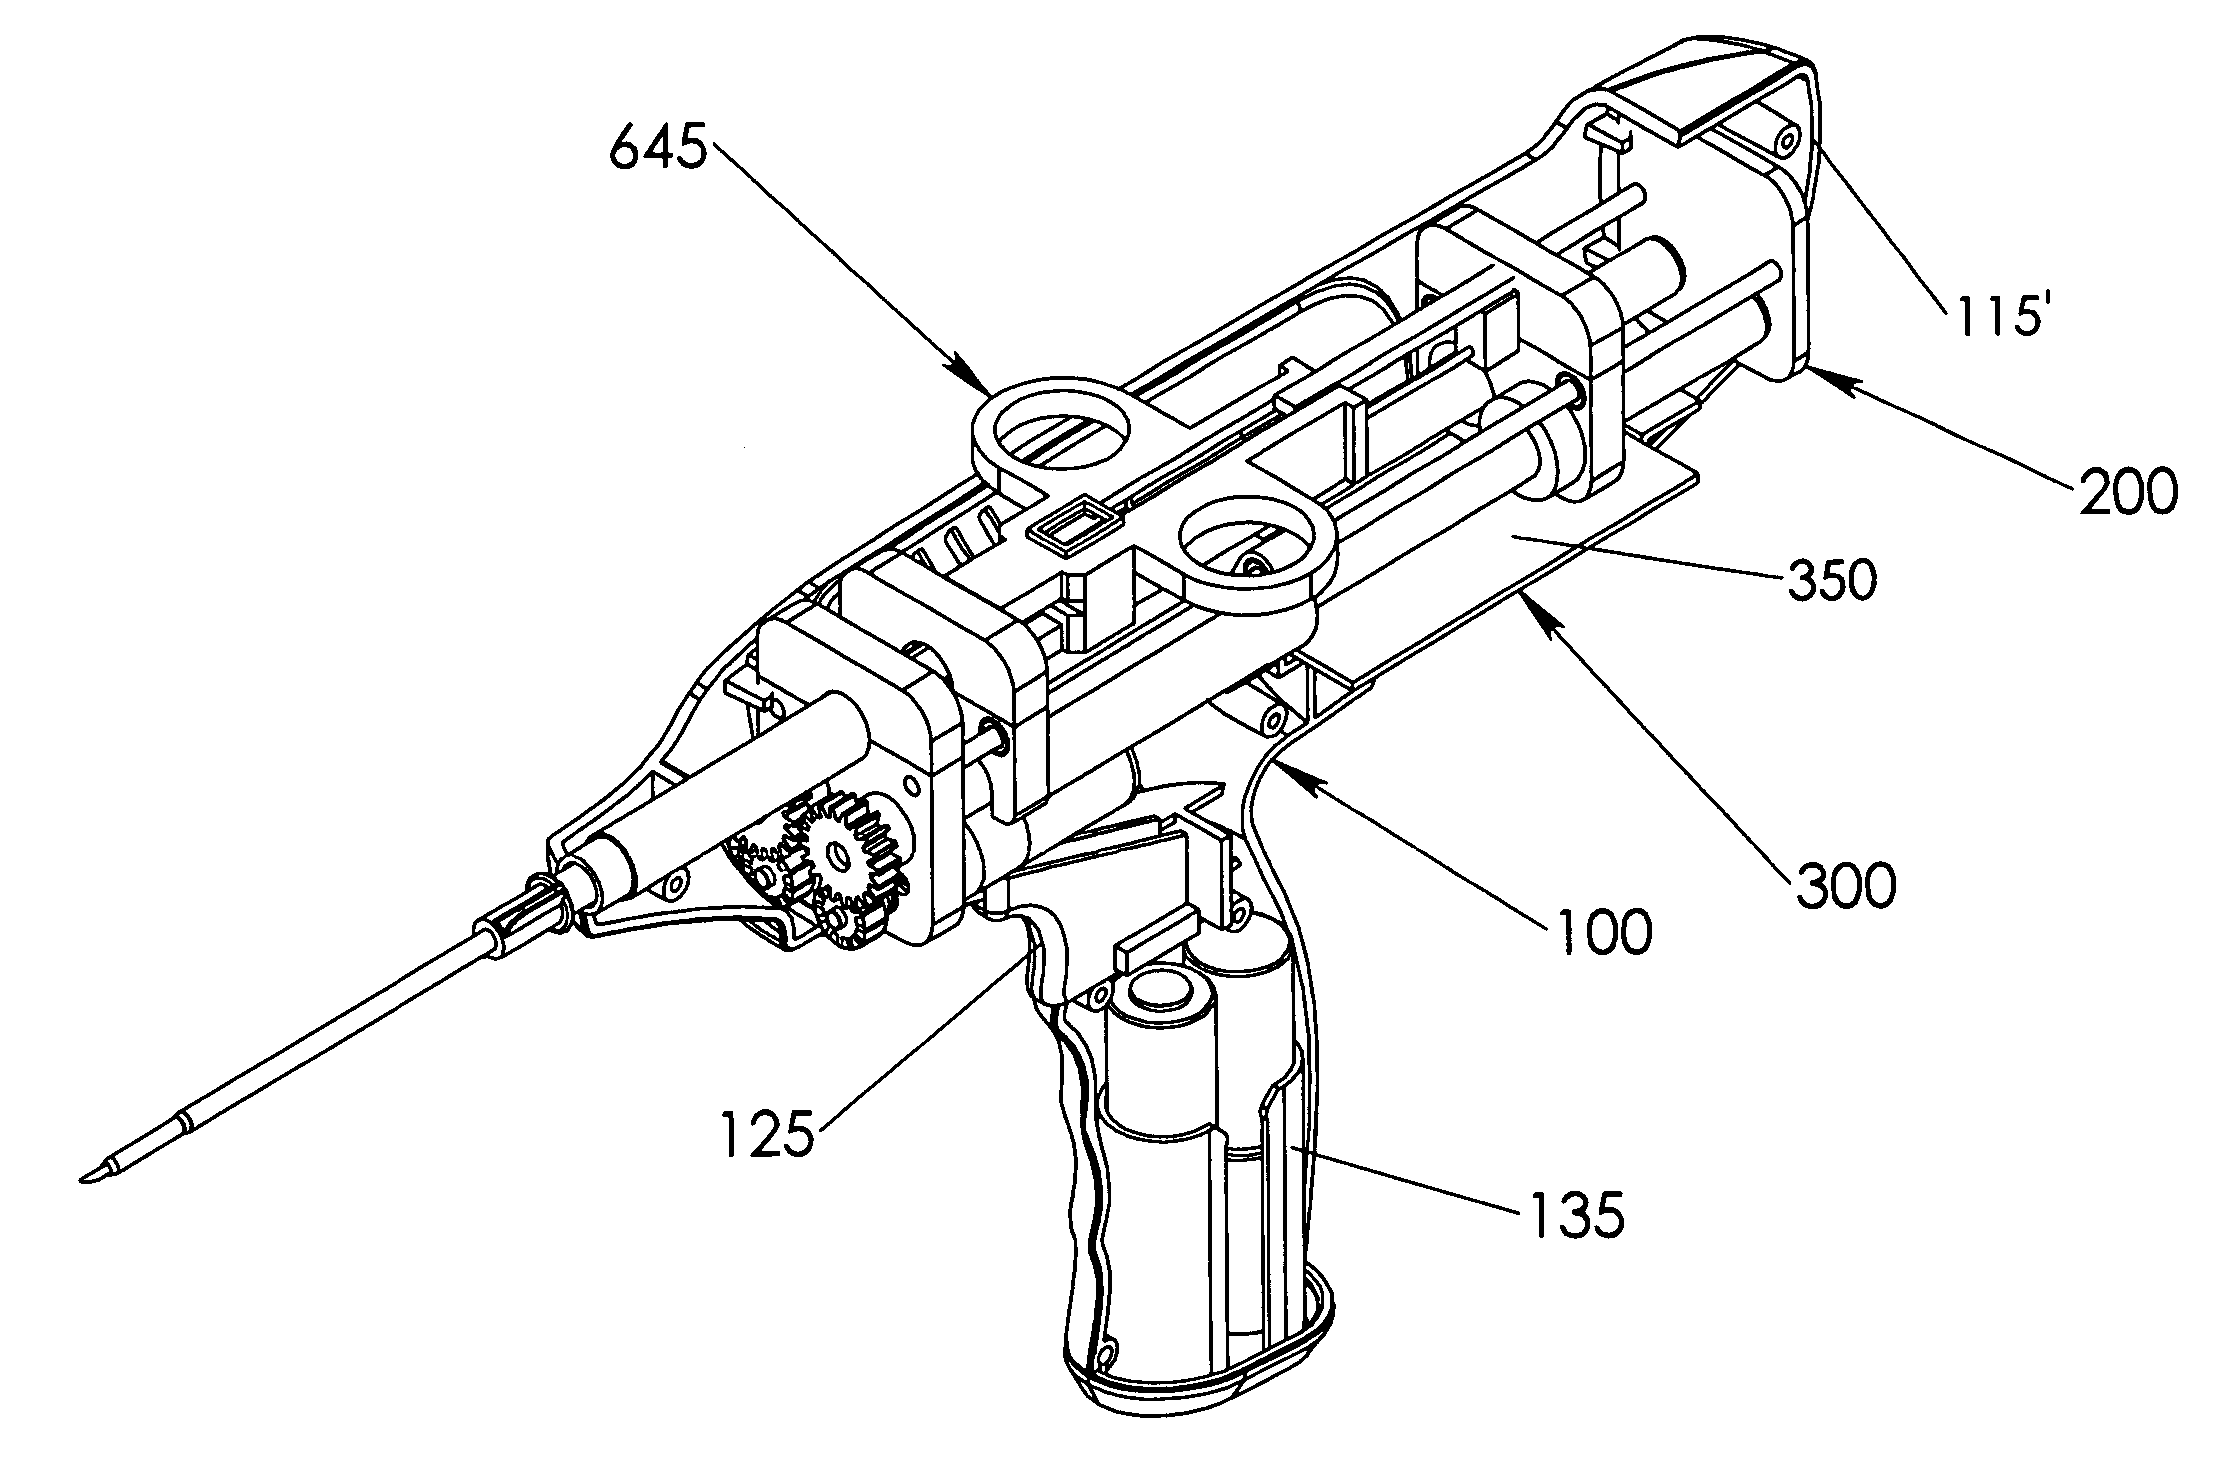 Automated biopsy and delivery device